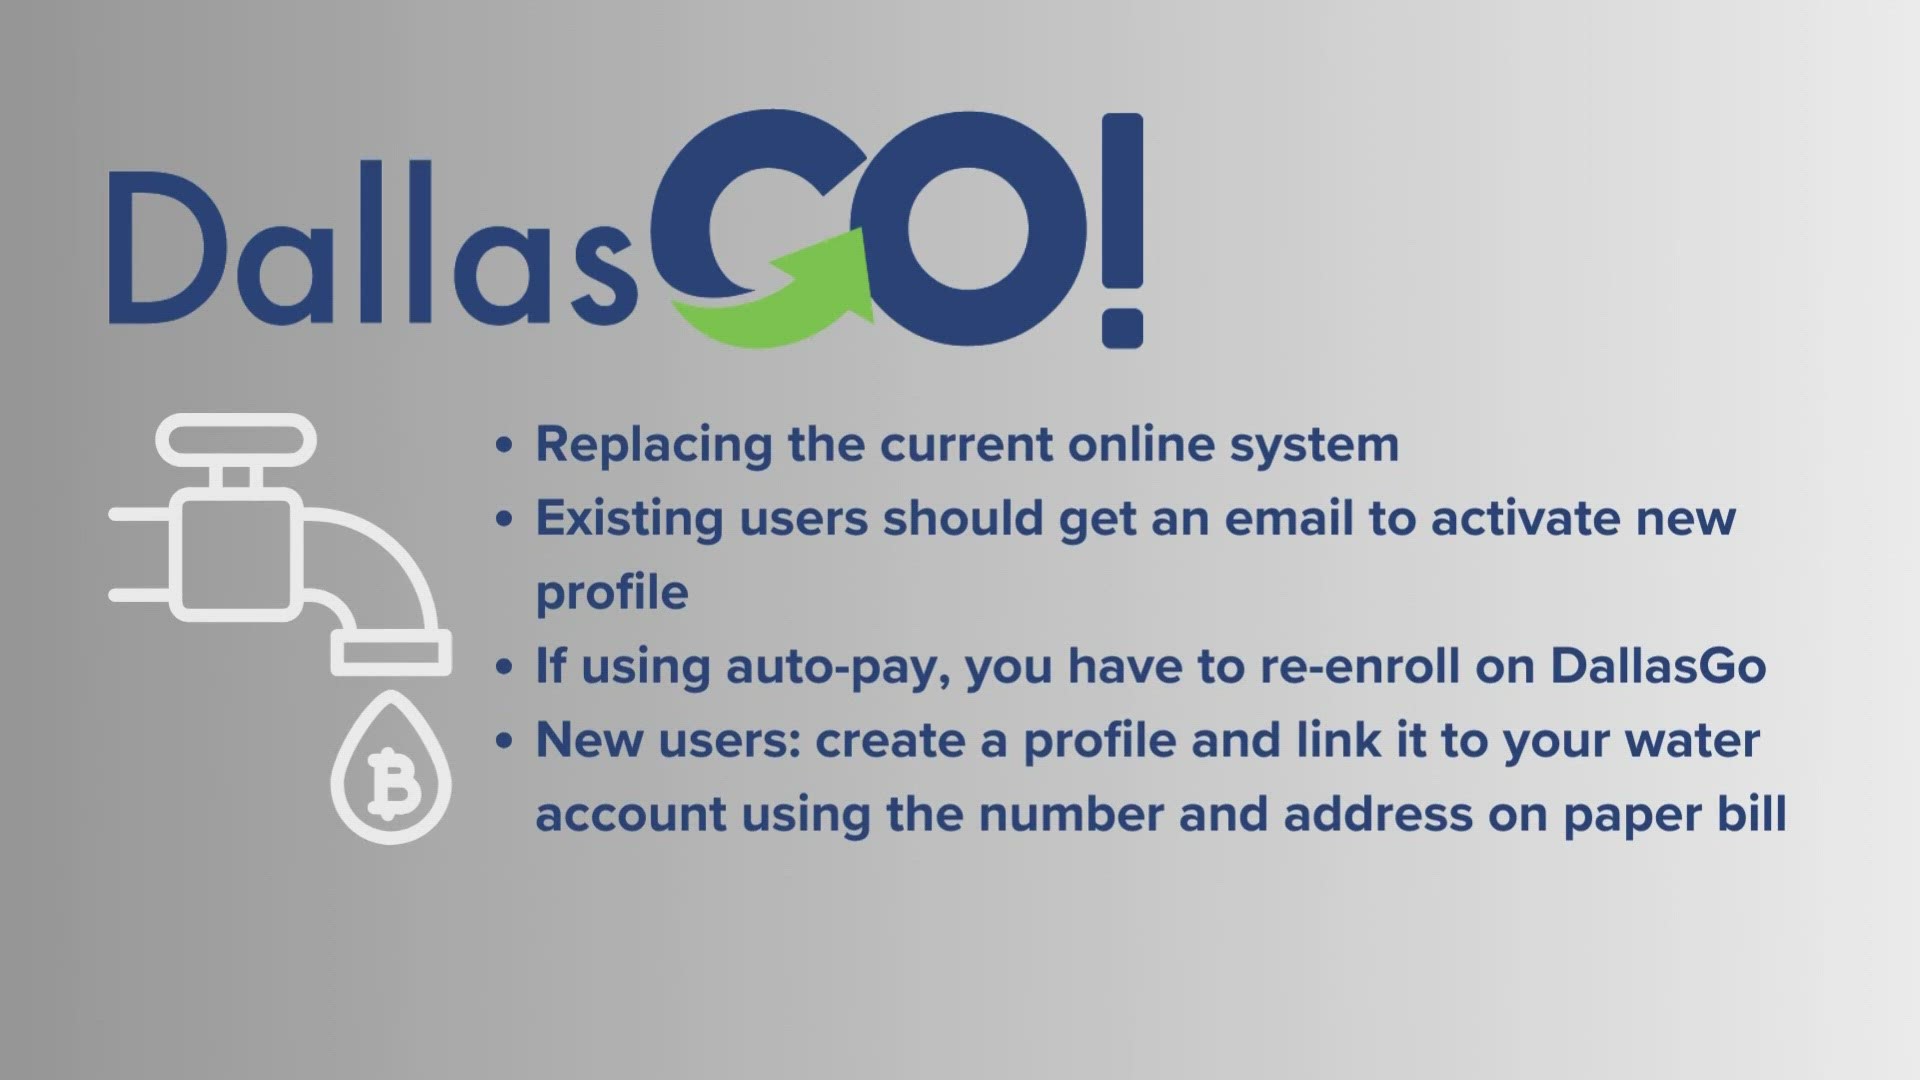 "Dallas Go" is an online payment platform set to replace its current e-pay system.